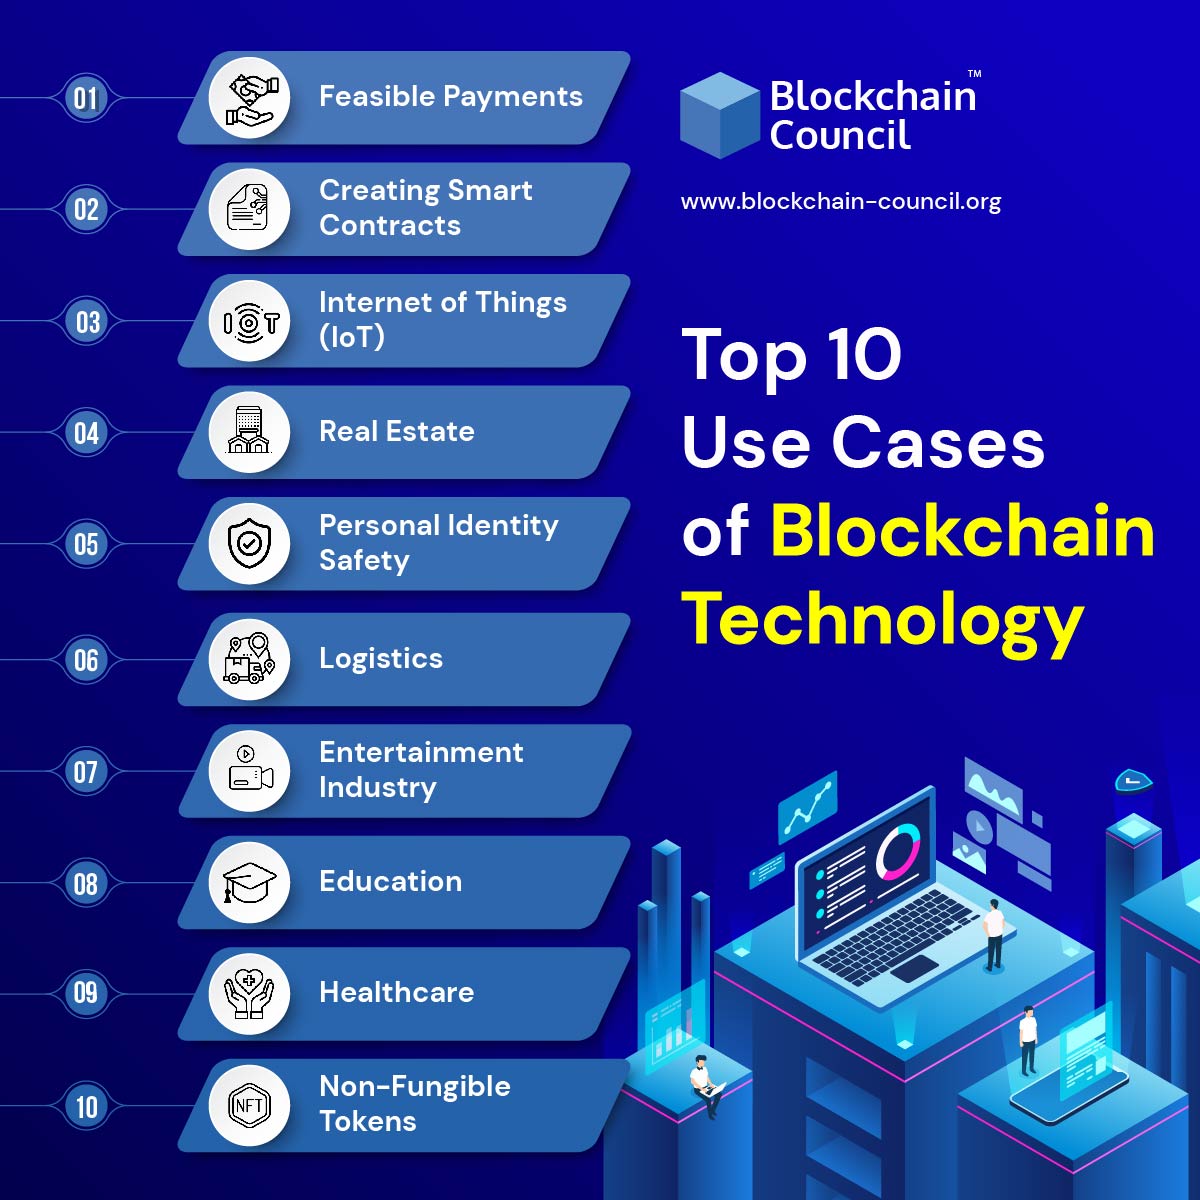 Top Use Cases of Blockchain Technology 